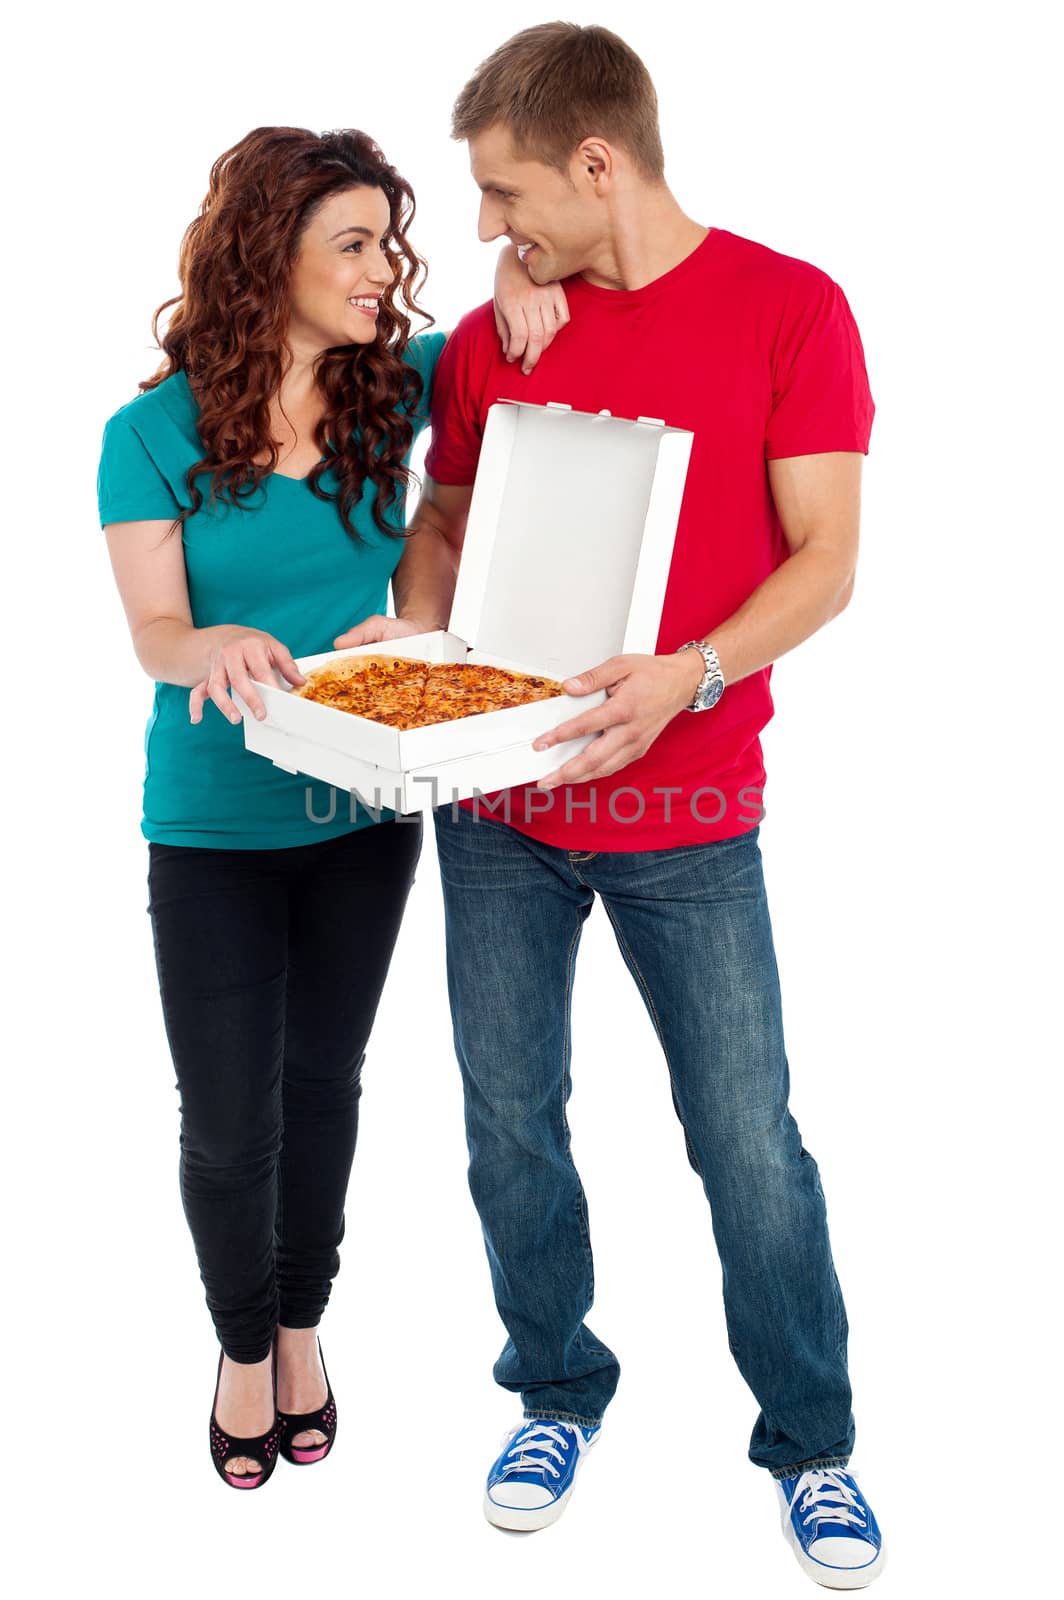 Love couple sharing pizza. Enjoying together by stockyimages